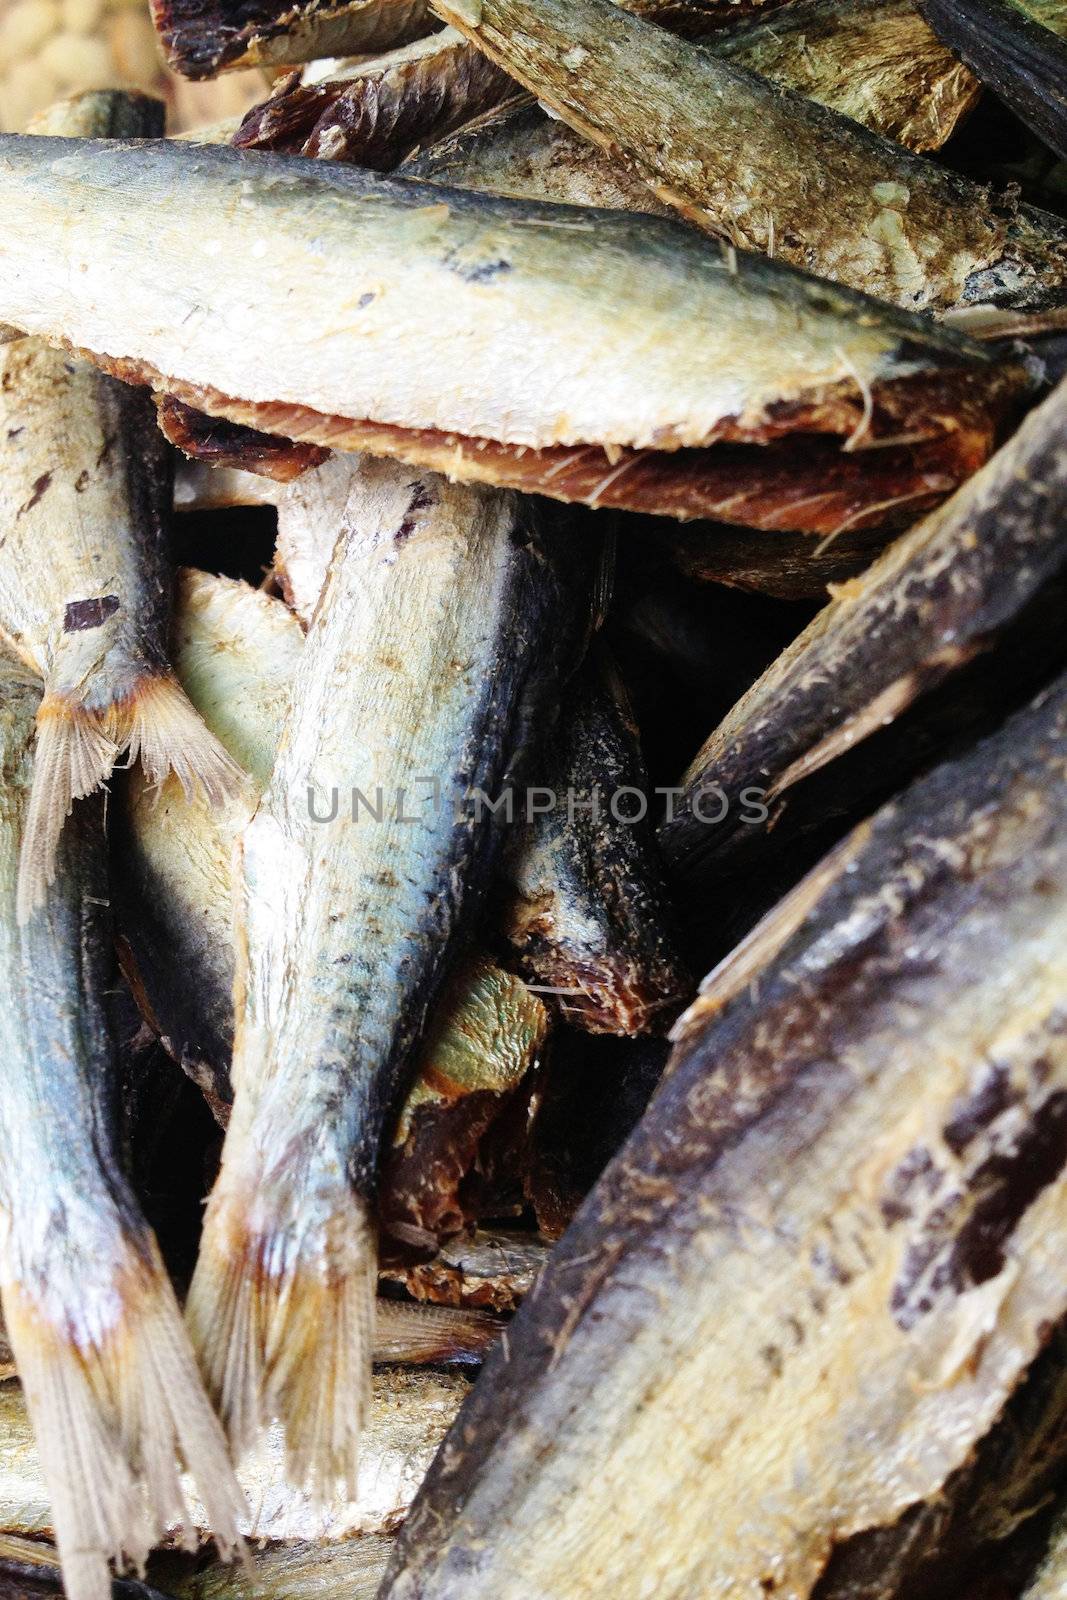 dry salted fish